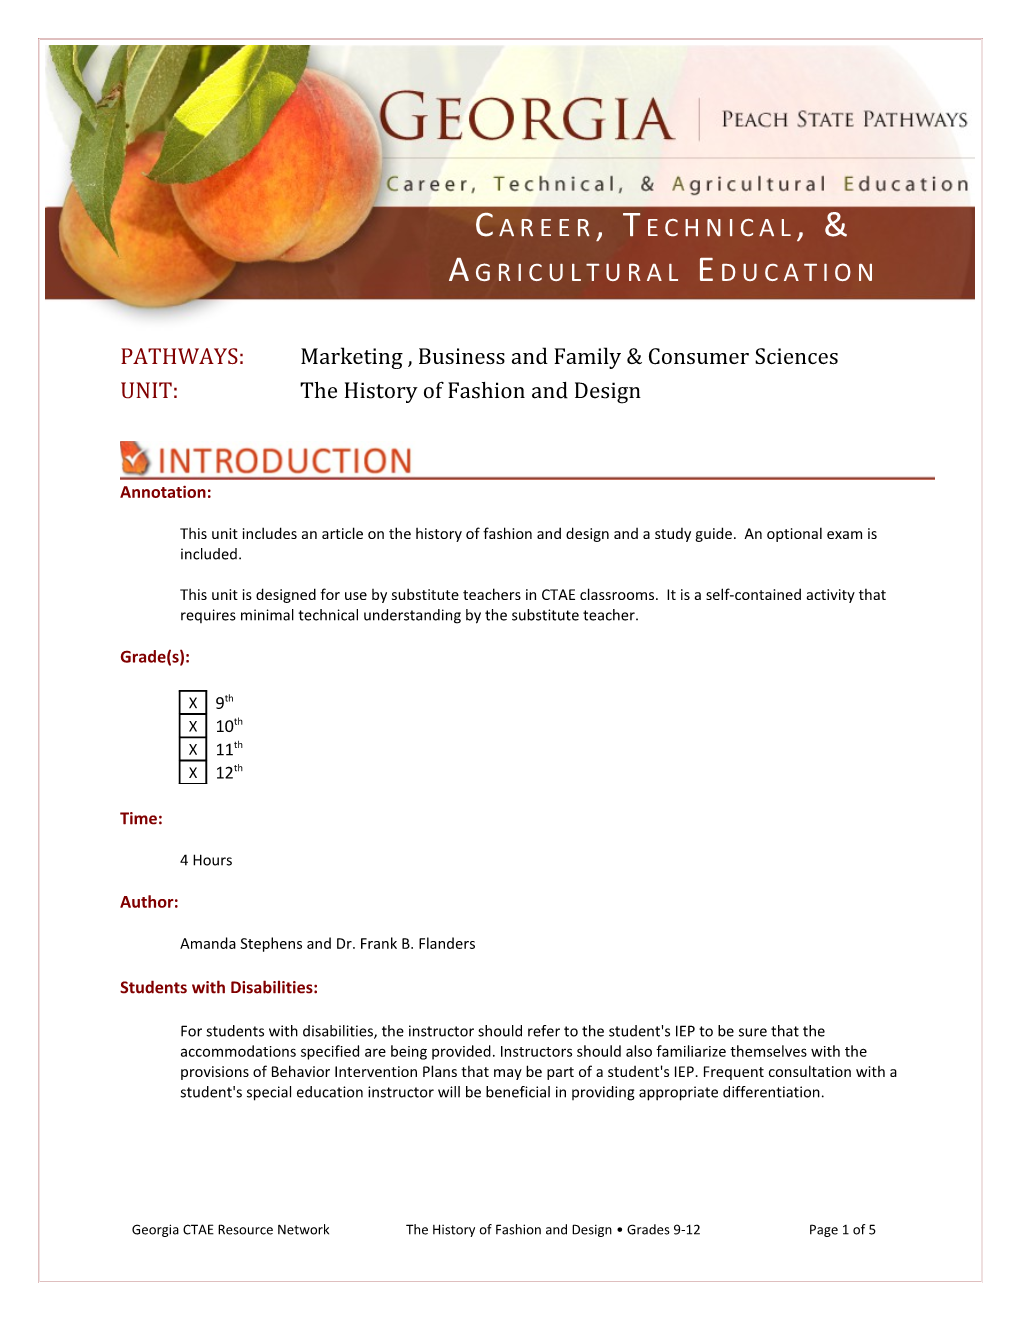 PATHWAYS: Marketing, Business and Family Consumer Sciences